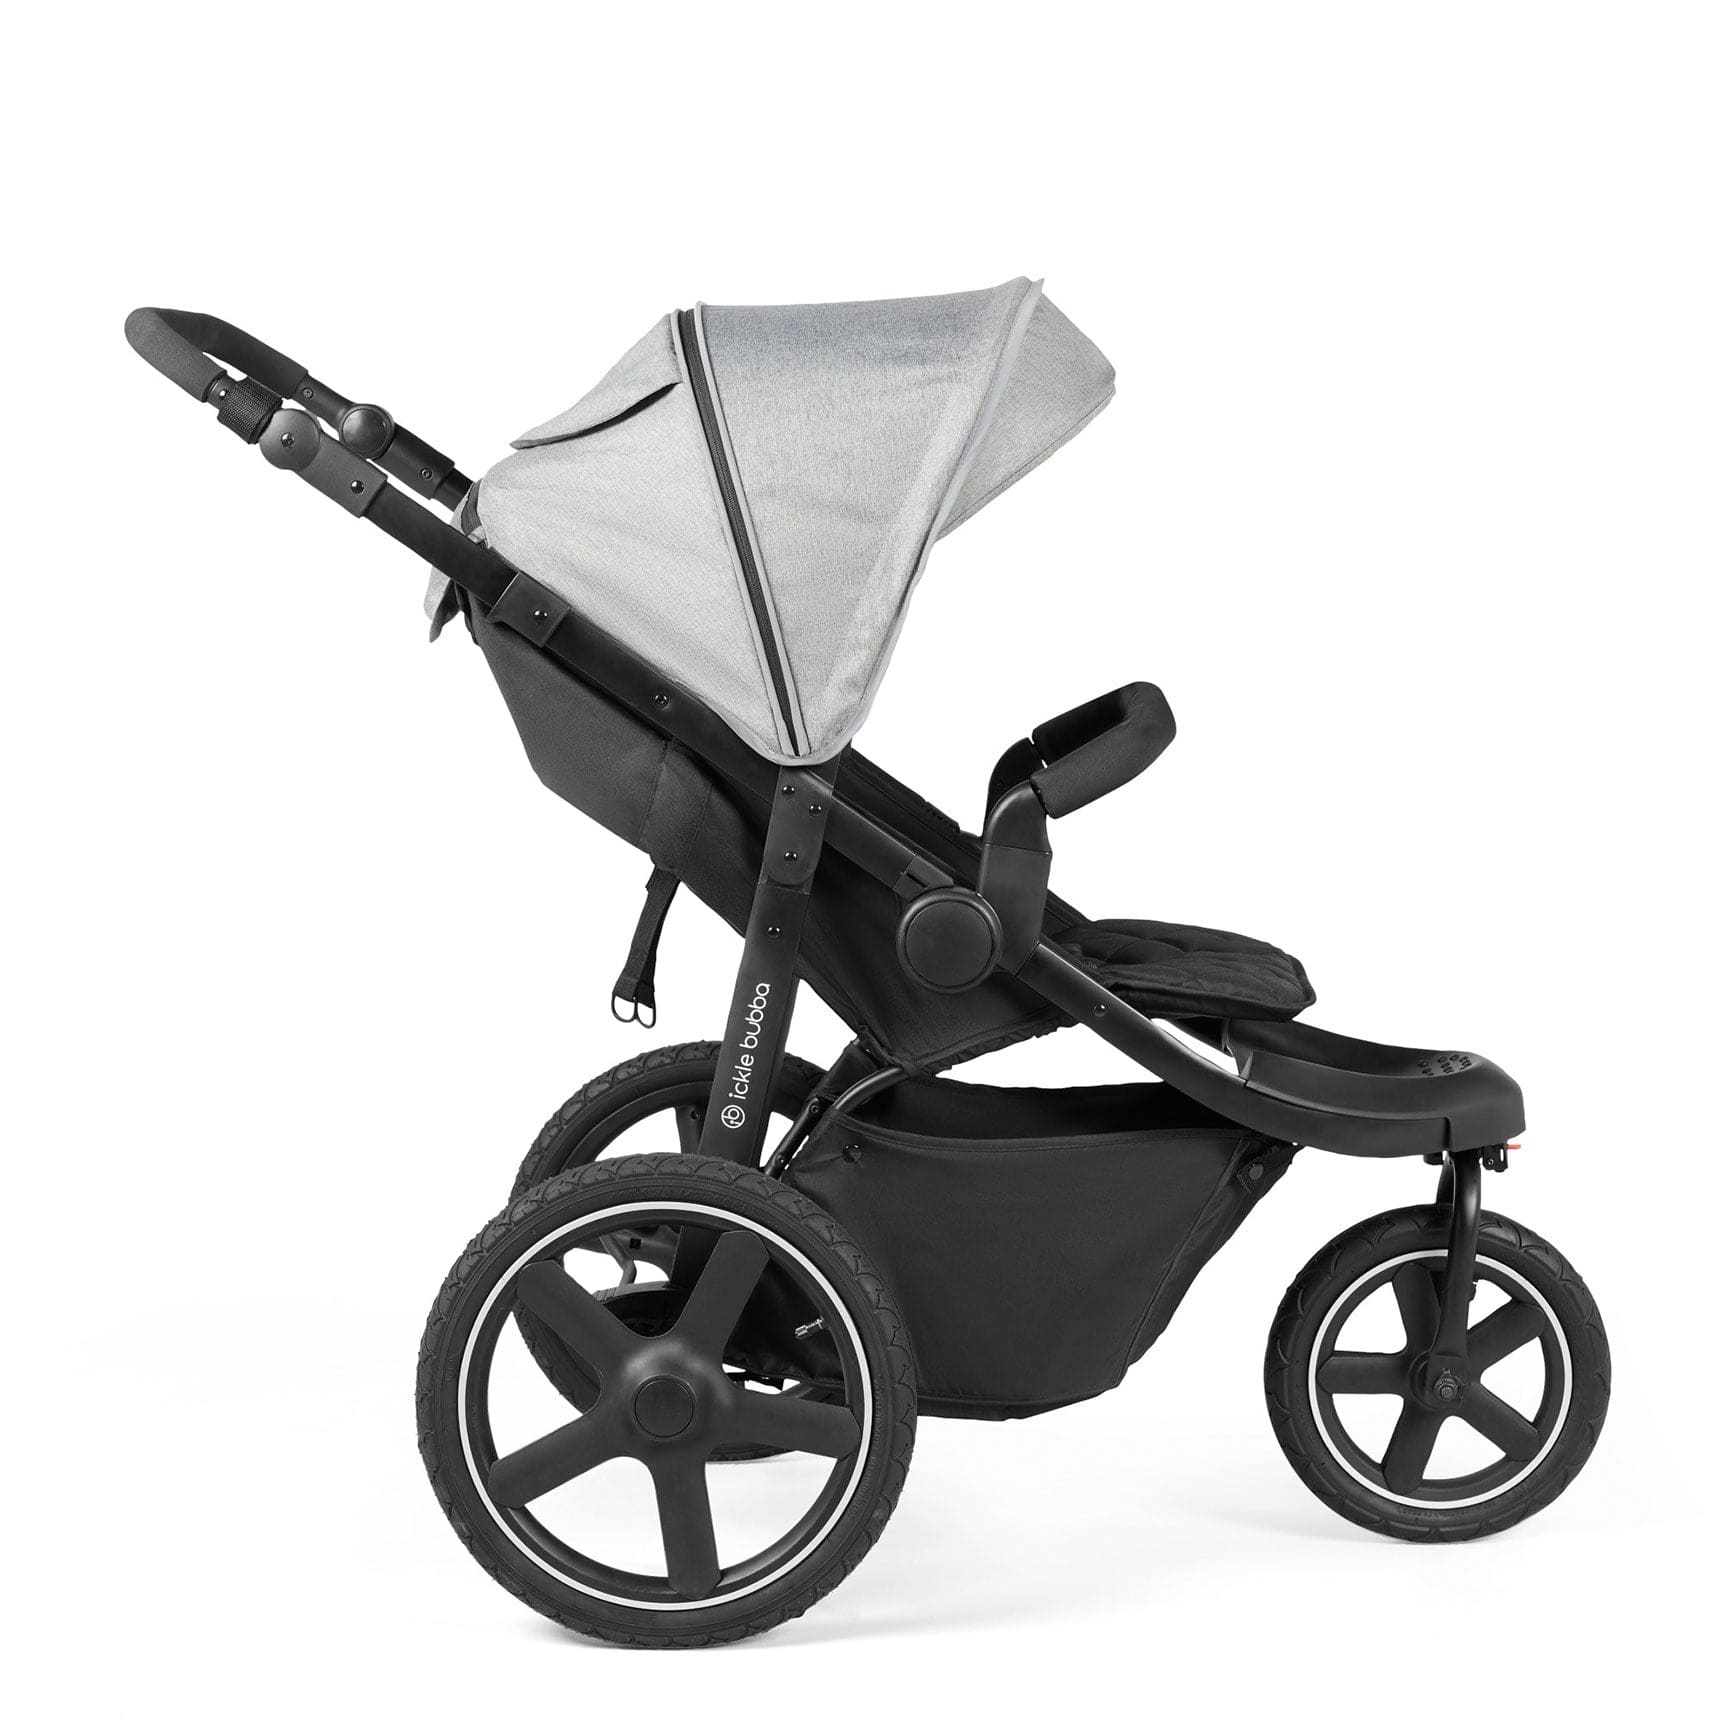 Ickle Bubba 3 wheel pushchairs Ickle Bubba Venus Max Jogger Stroller - Black/Space Grey 18-004-200-014